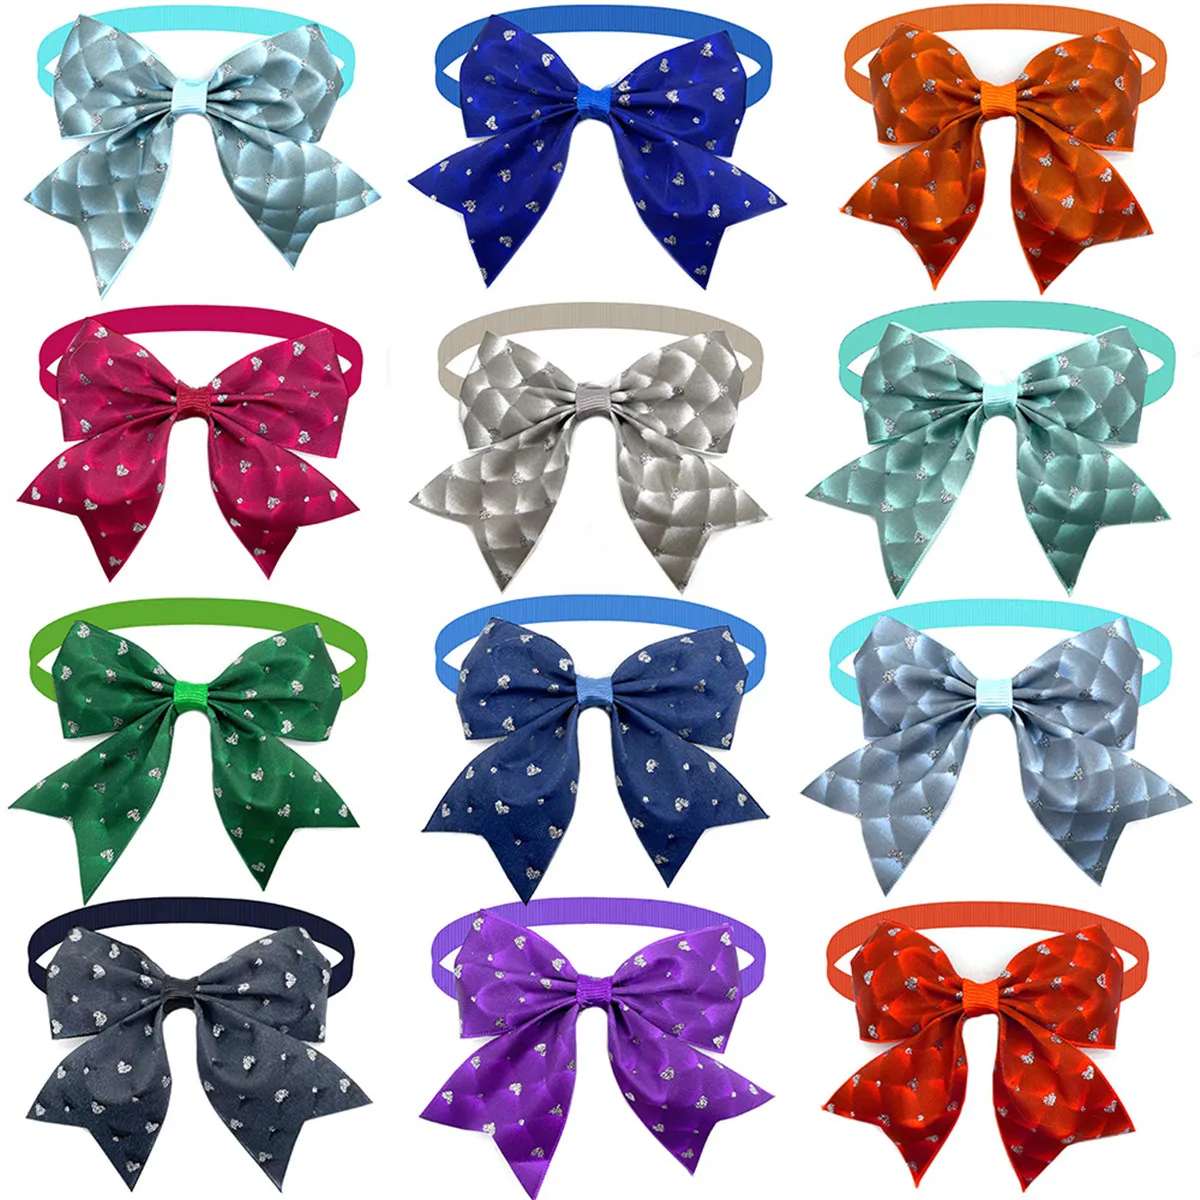 50/100pcs Dog Bow Tie Love Style Pet Supplies Neckties Small Dog Bowtie Pet Dog Cat Bowties Small Dog Grooming Accessories